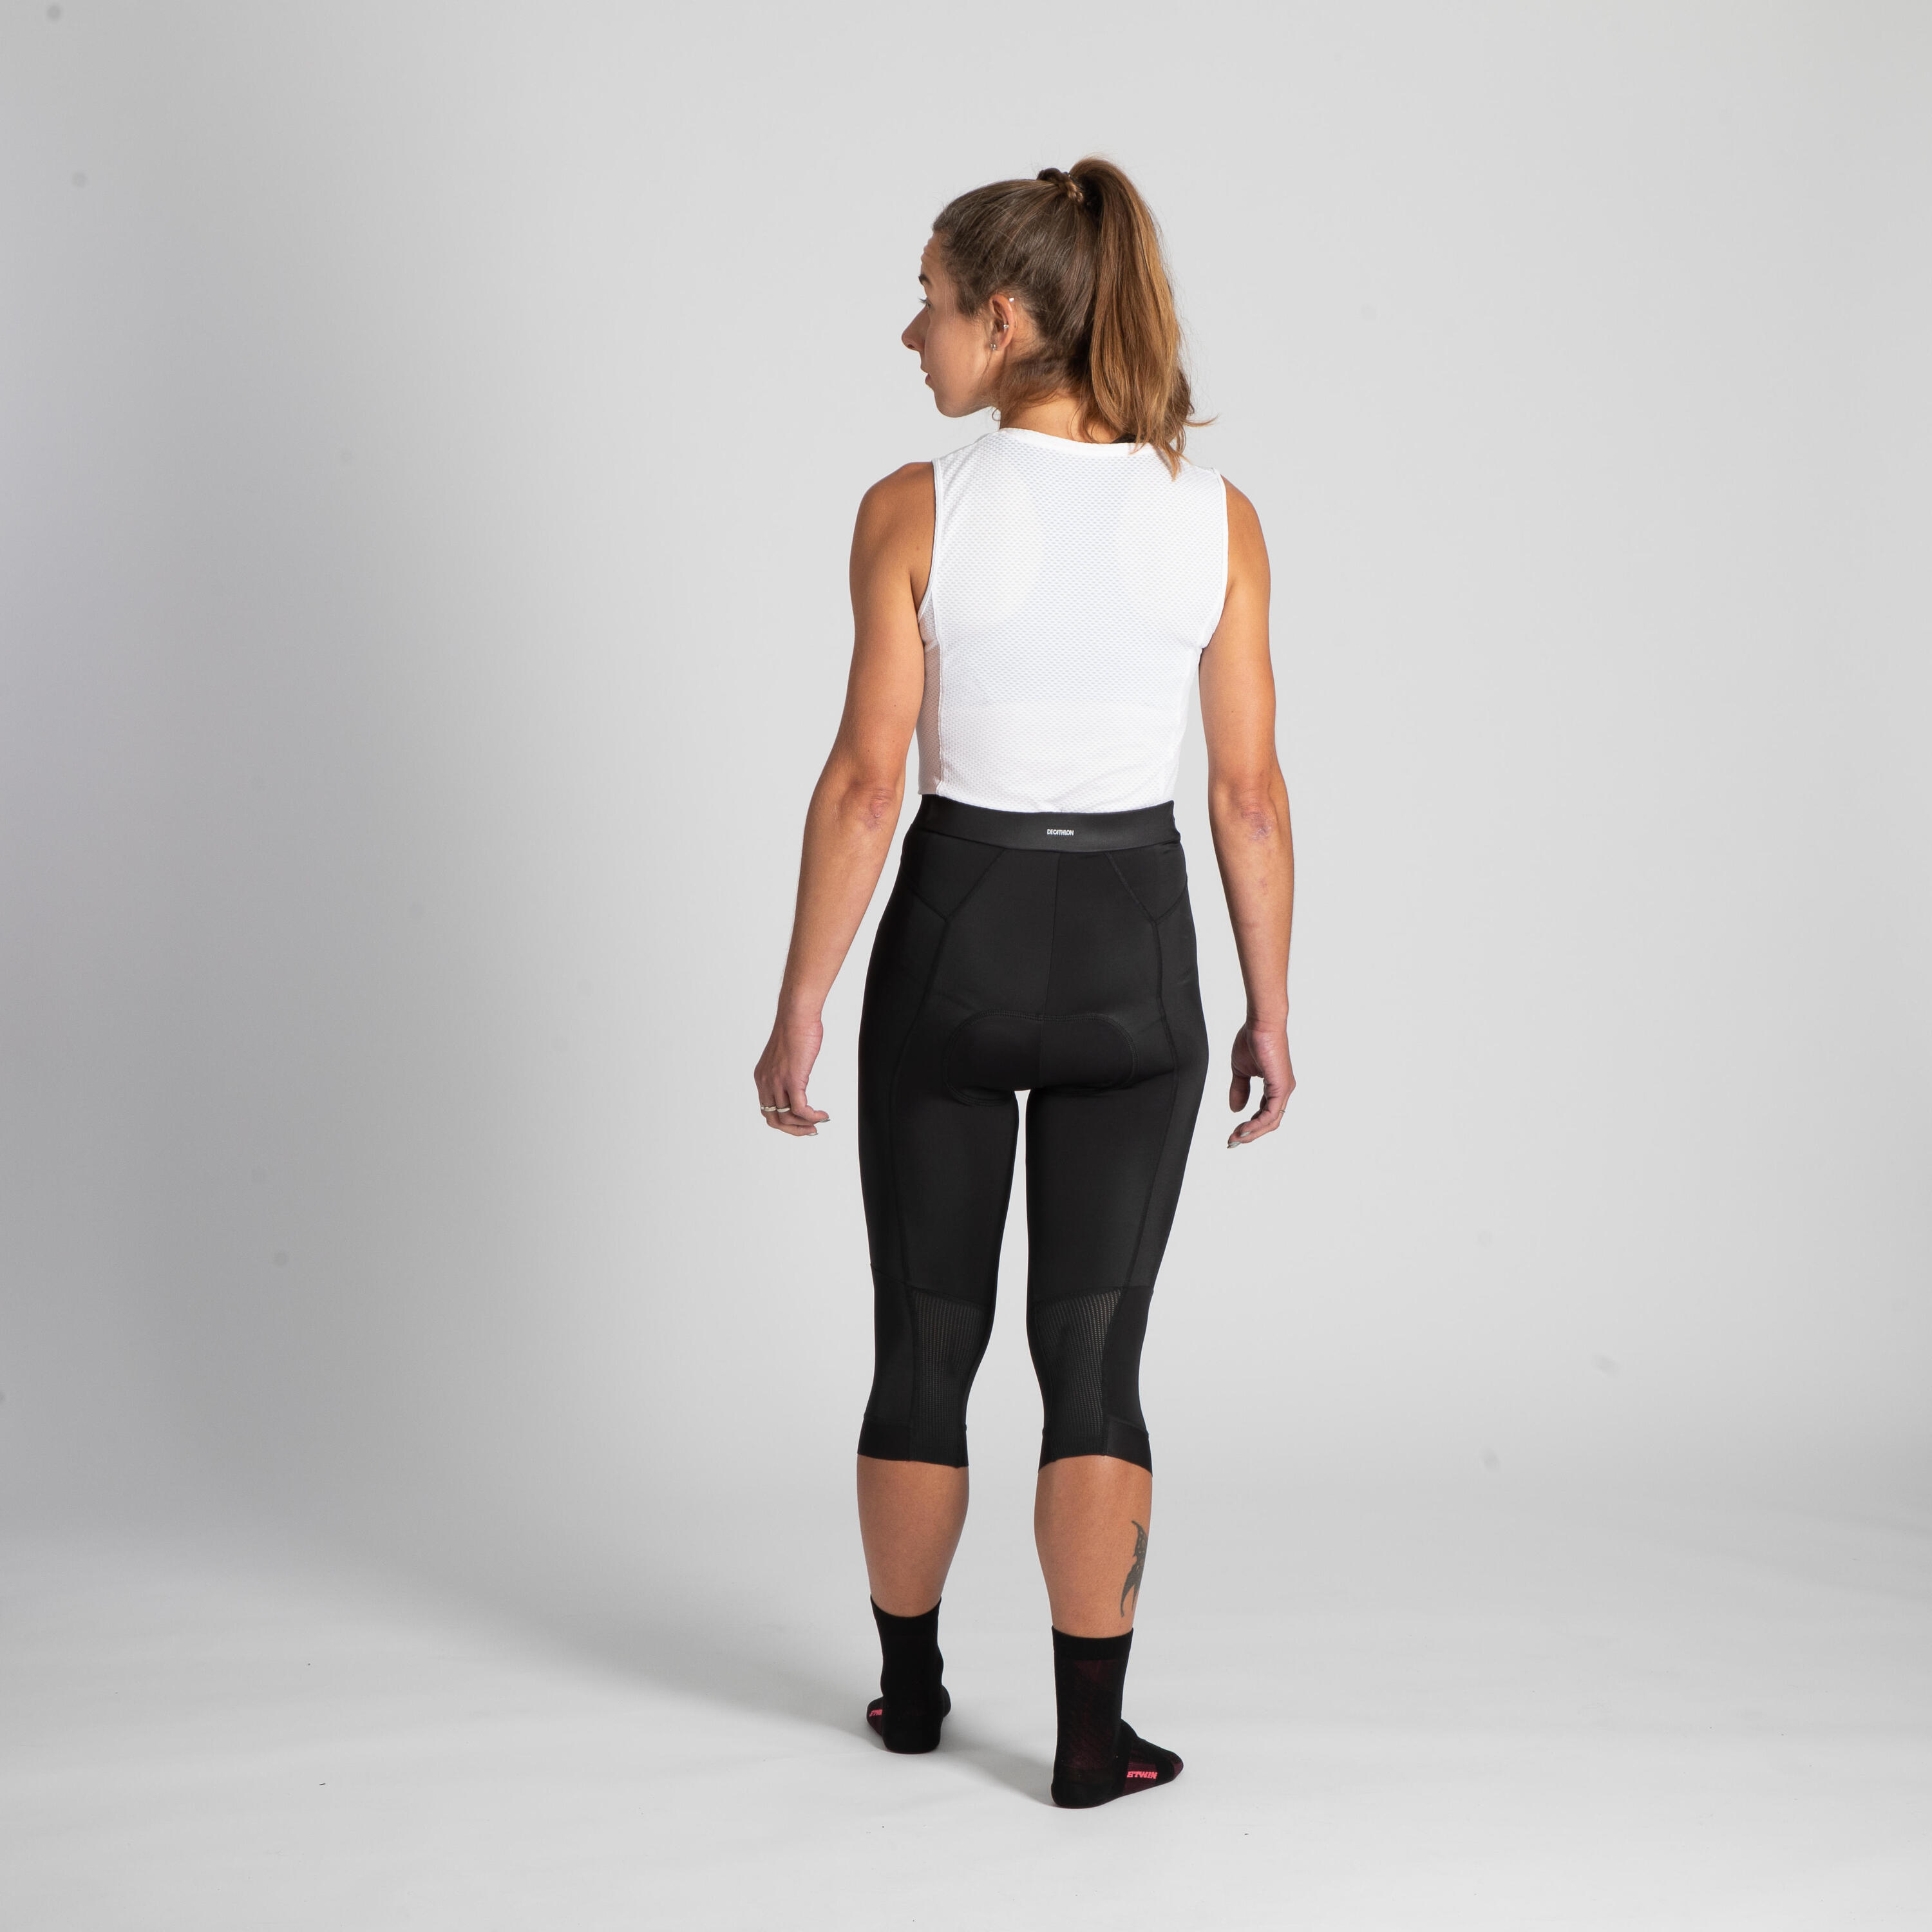 900 Women's Cropped Bibless Cycling Tights - Black 3/4